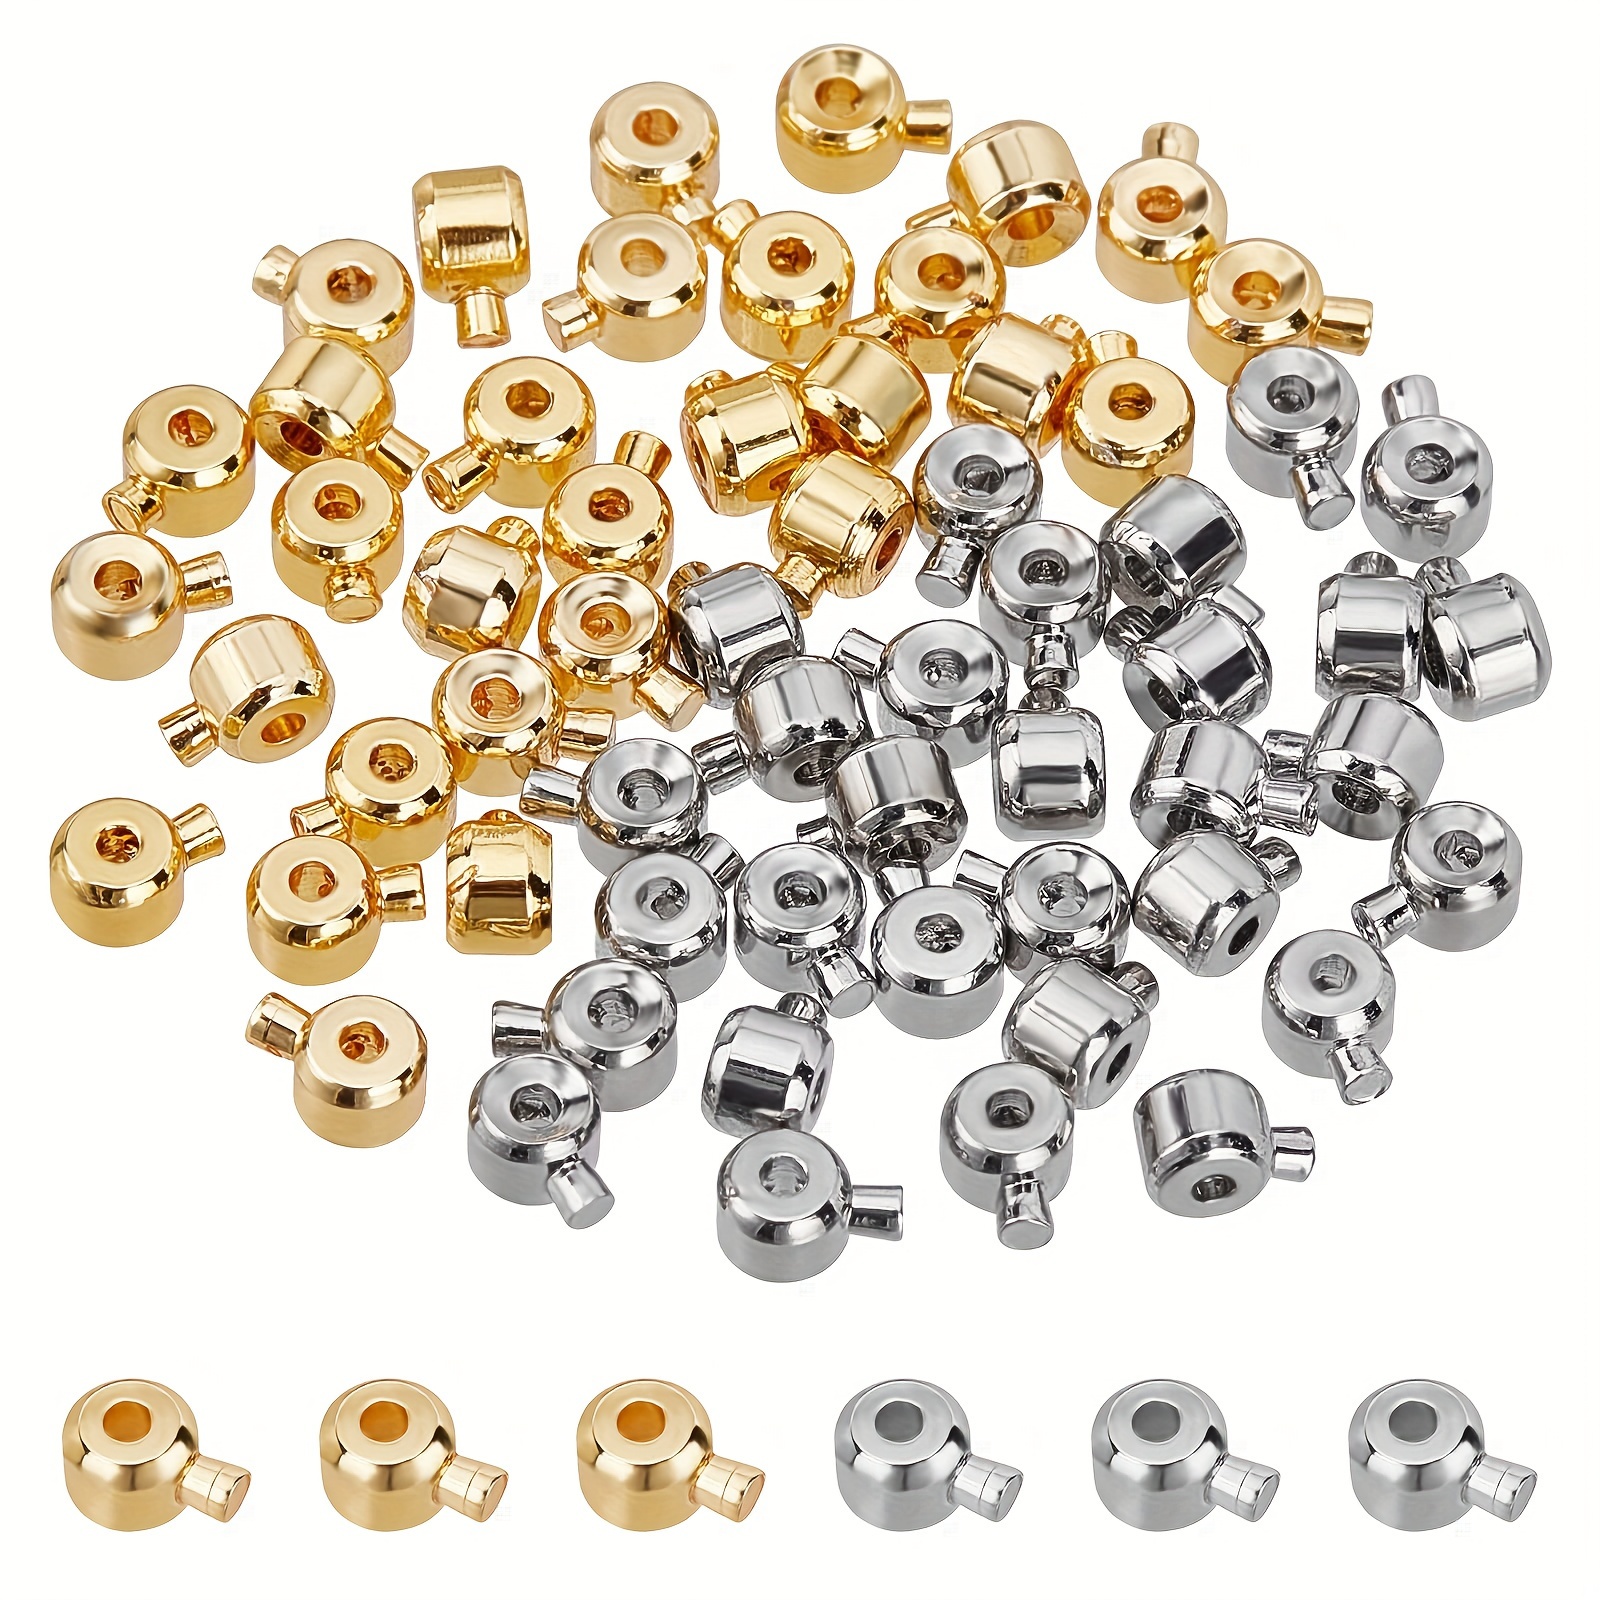 

60-piece Brass Crimp Beads For Crafting - Round Spacer Beads In Metallic Tones & Yellowish, Assorted Shapes For Diy Necklaces And Bracelets